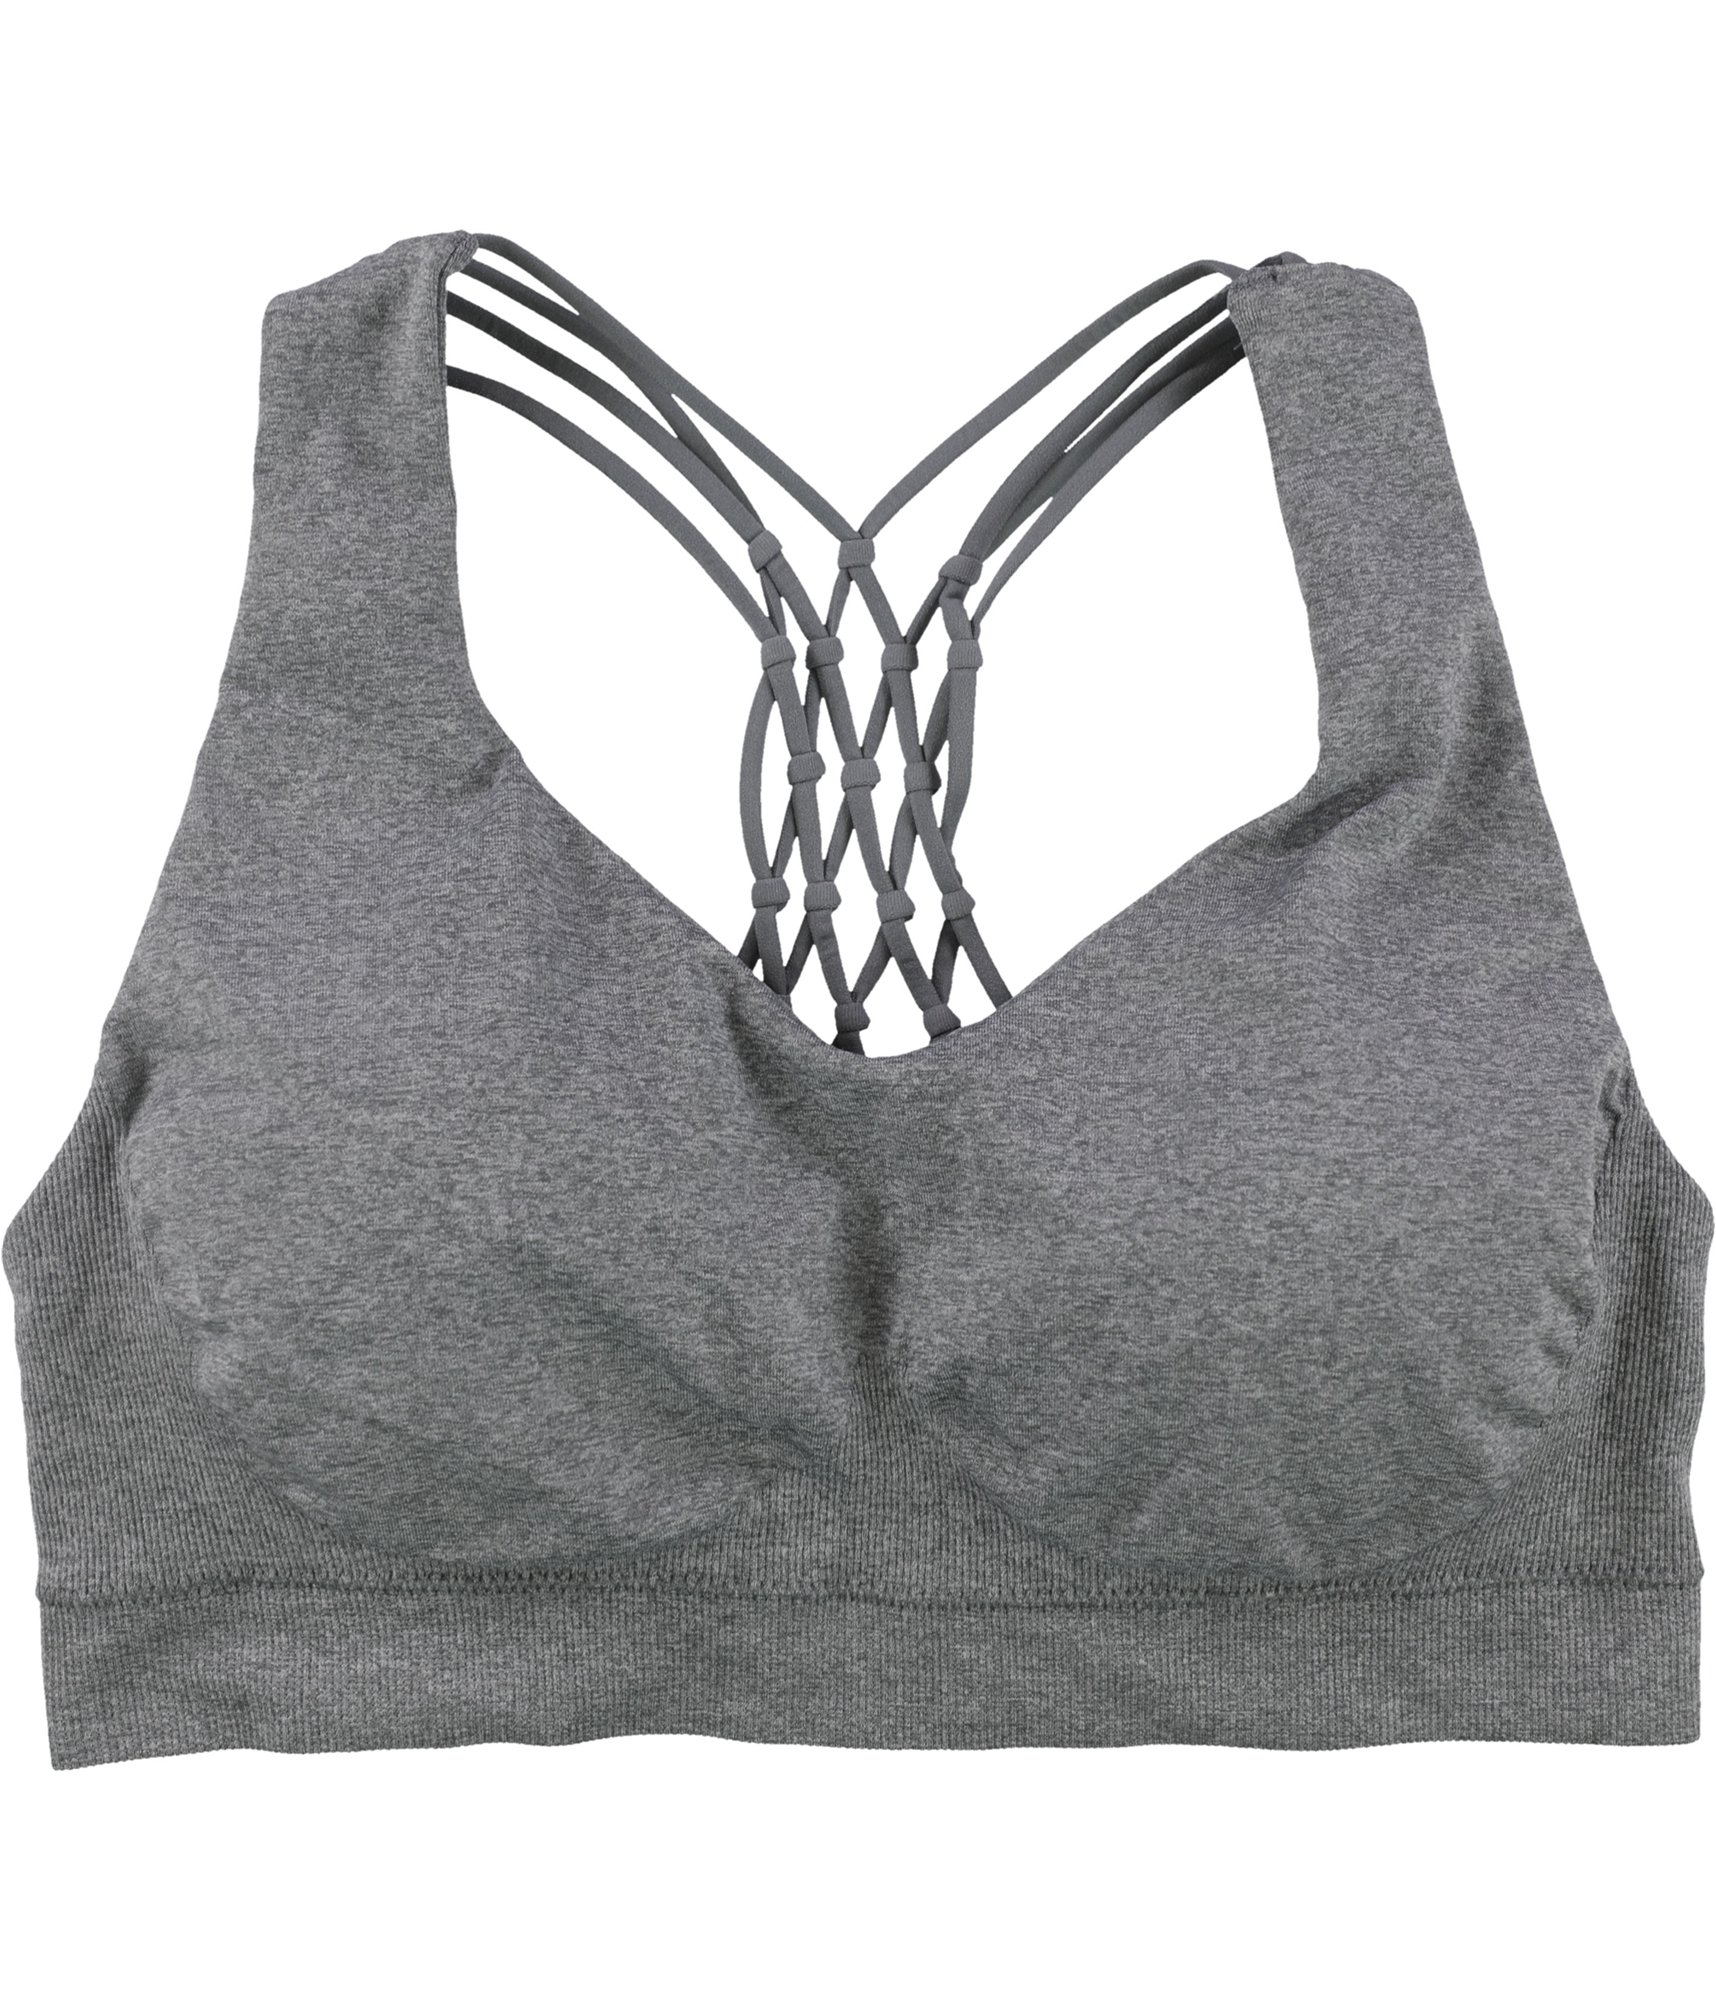 Buy a Pro-Fit Womens Seamless Knotted Sports Bra